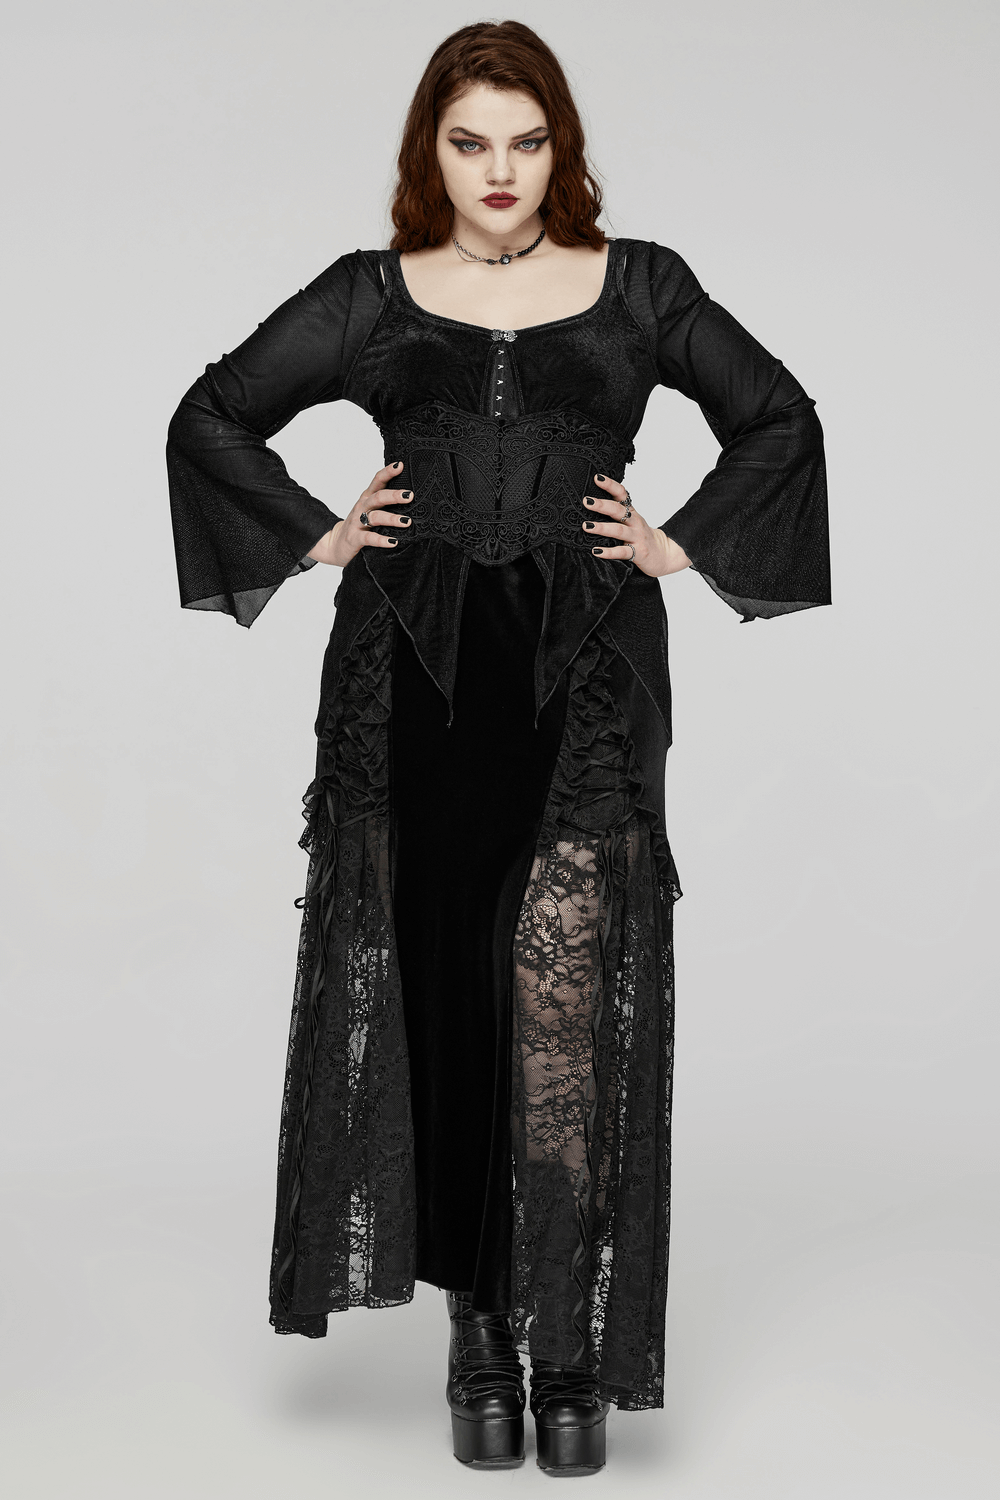 Black Women's Top with Bell Sleeves and Hook Closures